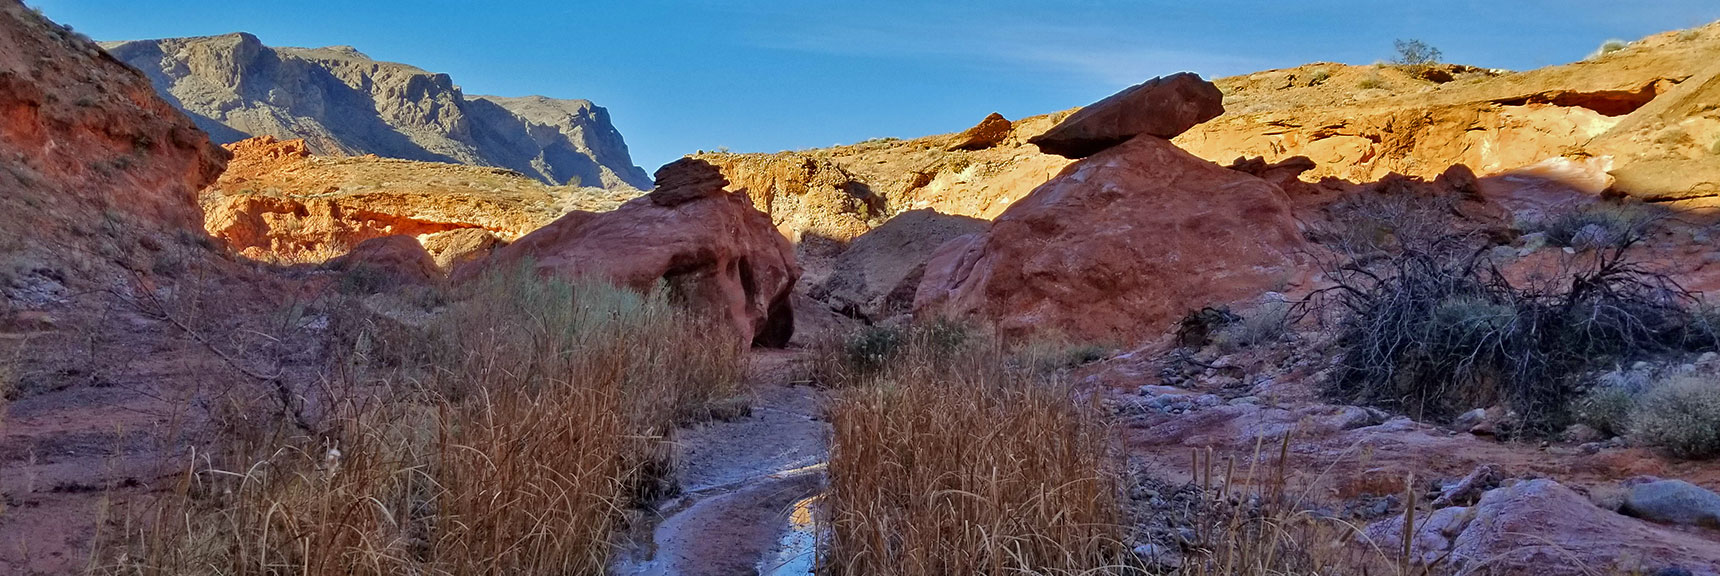 Approaching the Oasis on Charlie's Spring Trail, Valley of Fire State Park, Nevada